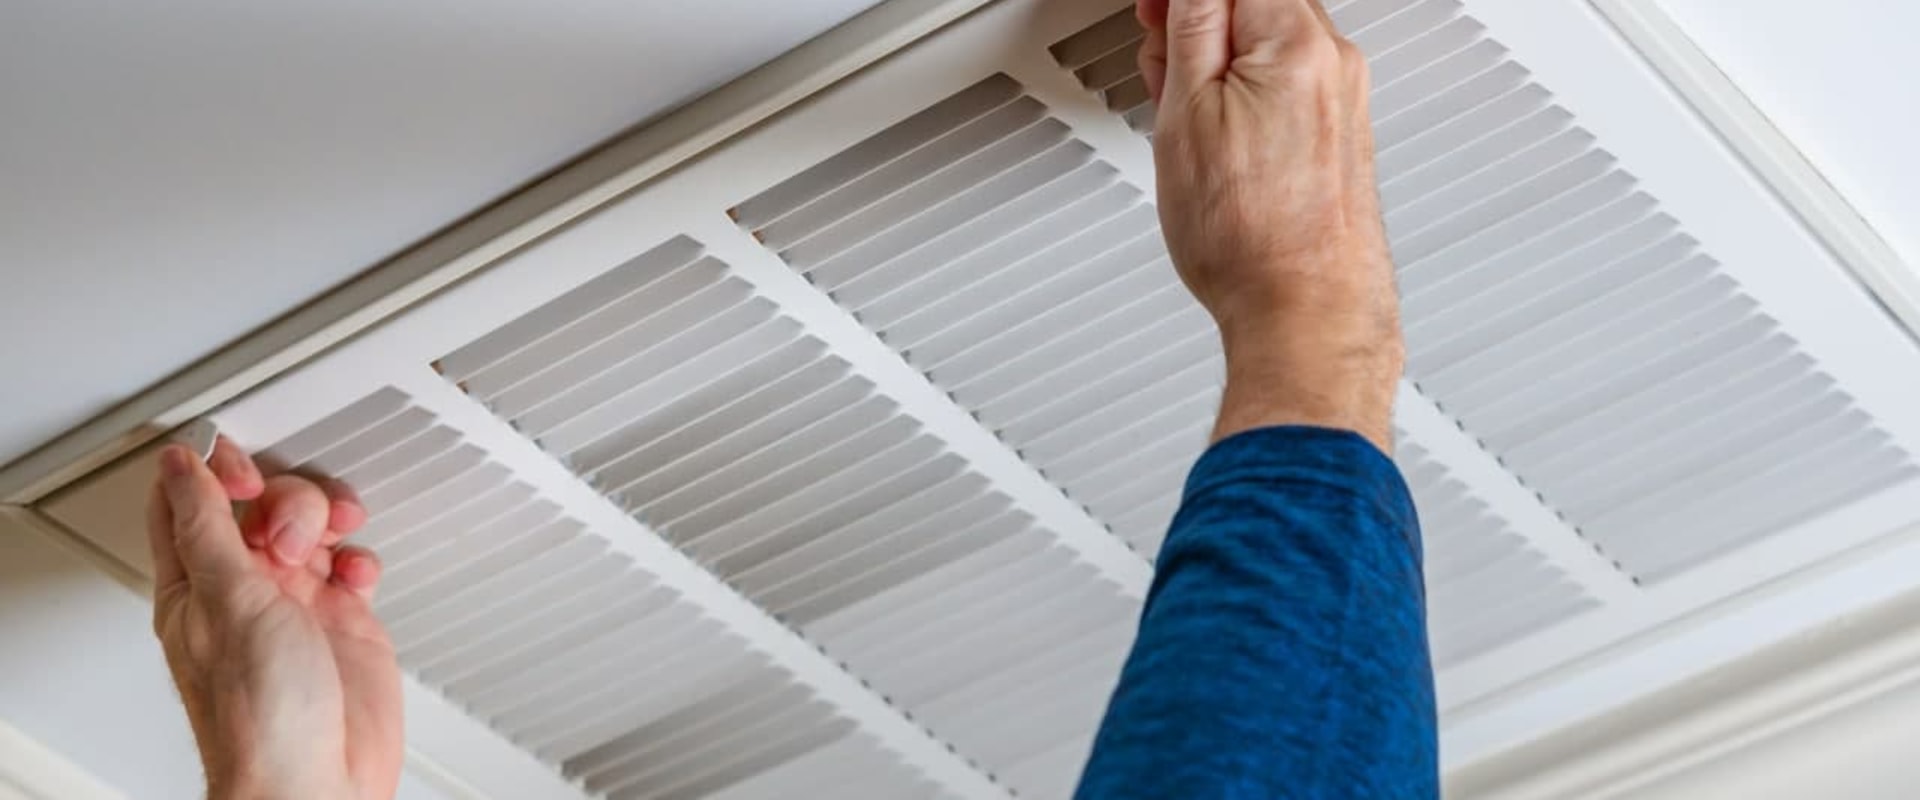 What is the Standard Size for a House Air Filter?